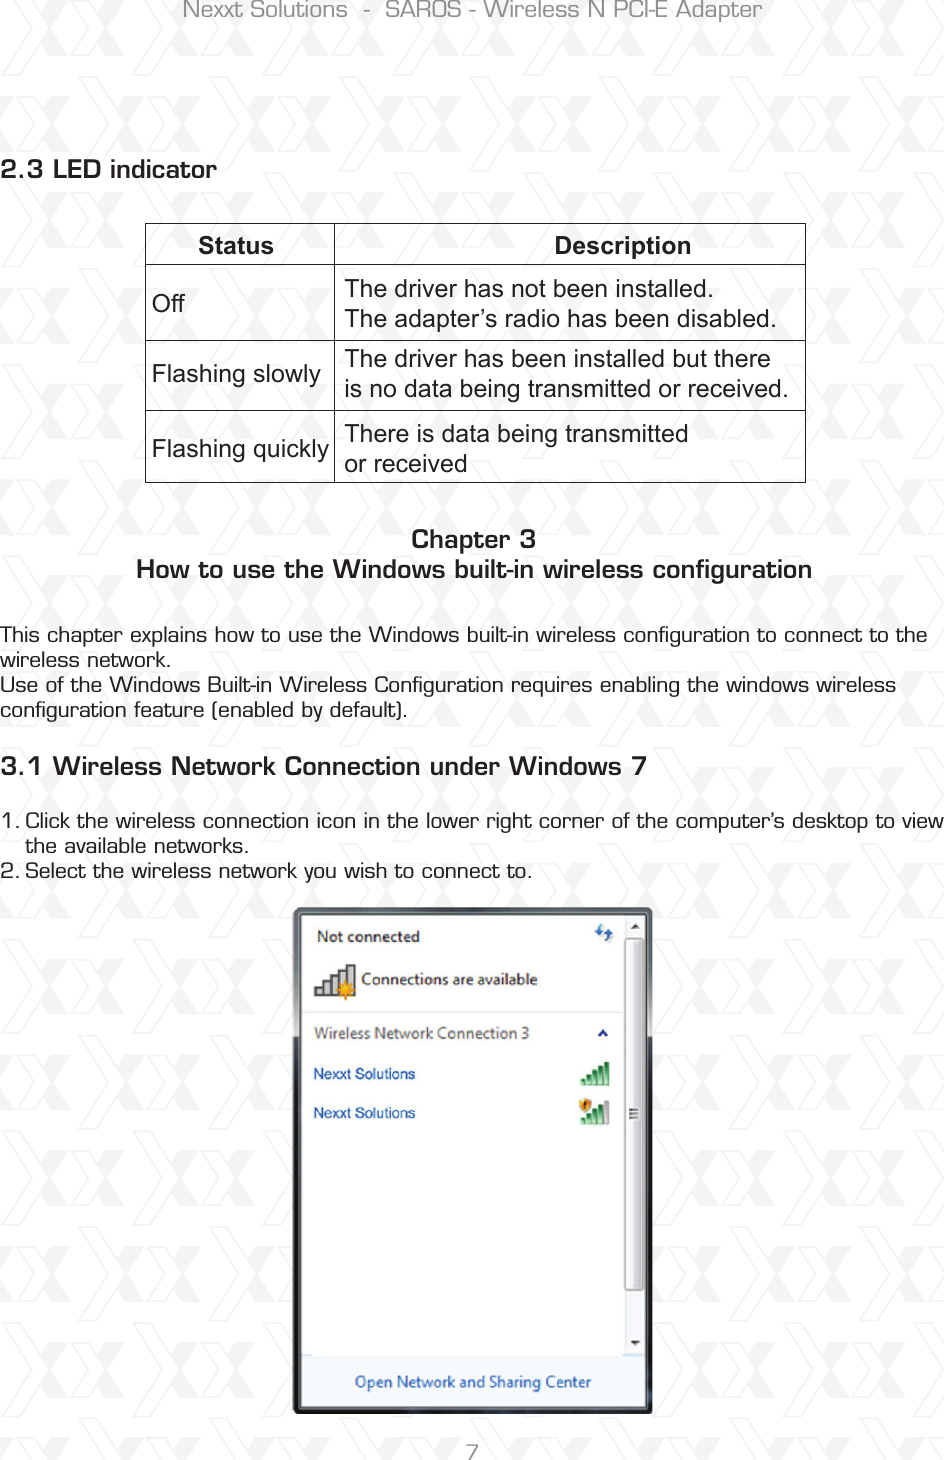 Nexxt Solutions  -  SAROS - Wireless N PCI-E Adapter7Chapter 3How to use the Windows built-in wireless conﬁguration This chapter explains how to use the Windows built-in wireless conﬁguration to connect to the wireless network. Use of the Windows Built-in Wireless Conguration requires enabling the windows wireless conguration feature (enabled by default).Click the wireless connection icon in the lower right corner of the computer’s desktop to view the available networks. Select the wireless network you wish to connect to.1.2.2.3 LED indicator3.1 Wireless Network Connection under Windows 7 Status DescriptionOffFlashing slowlyThe driver has not been installed.The adapter’s radio has been disabled.The driver has been installed but there is no data being transmitted or received. Flashing quickly There is data being transmitted or received